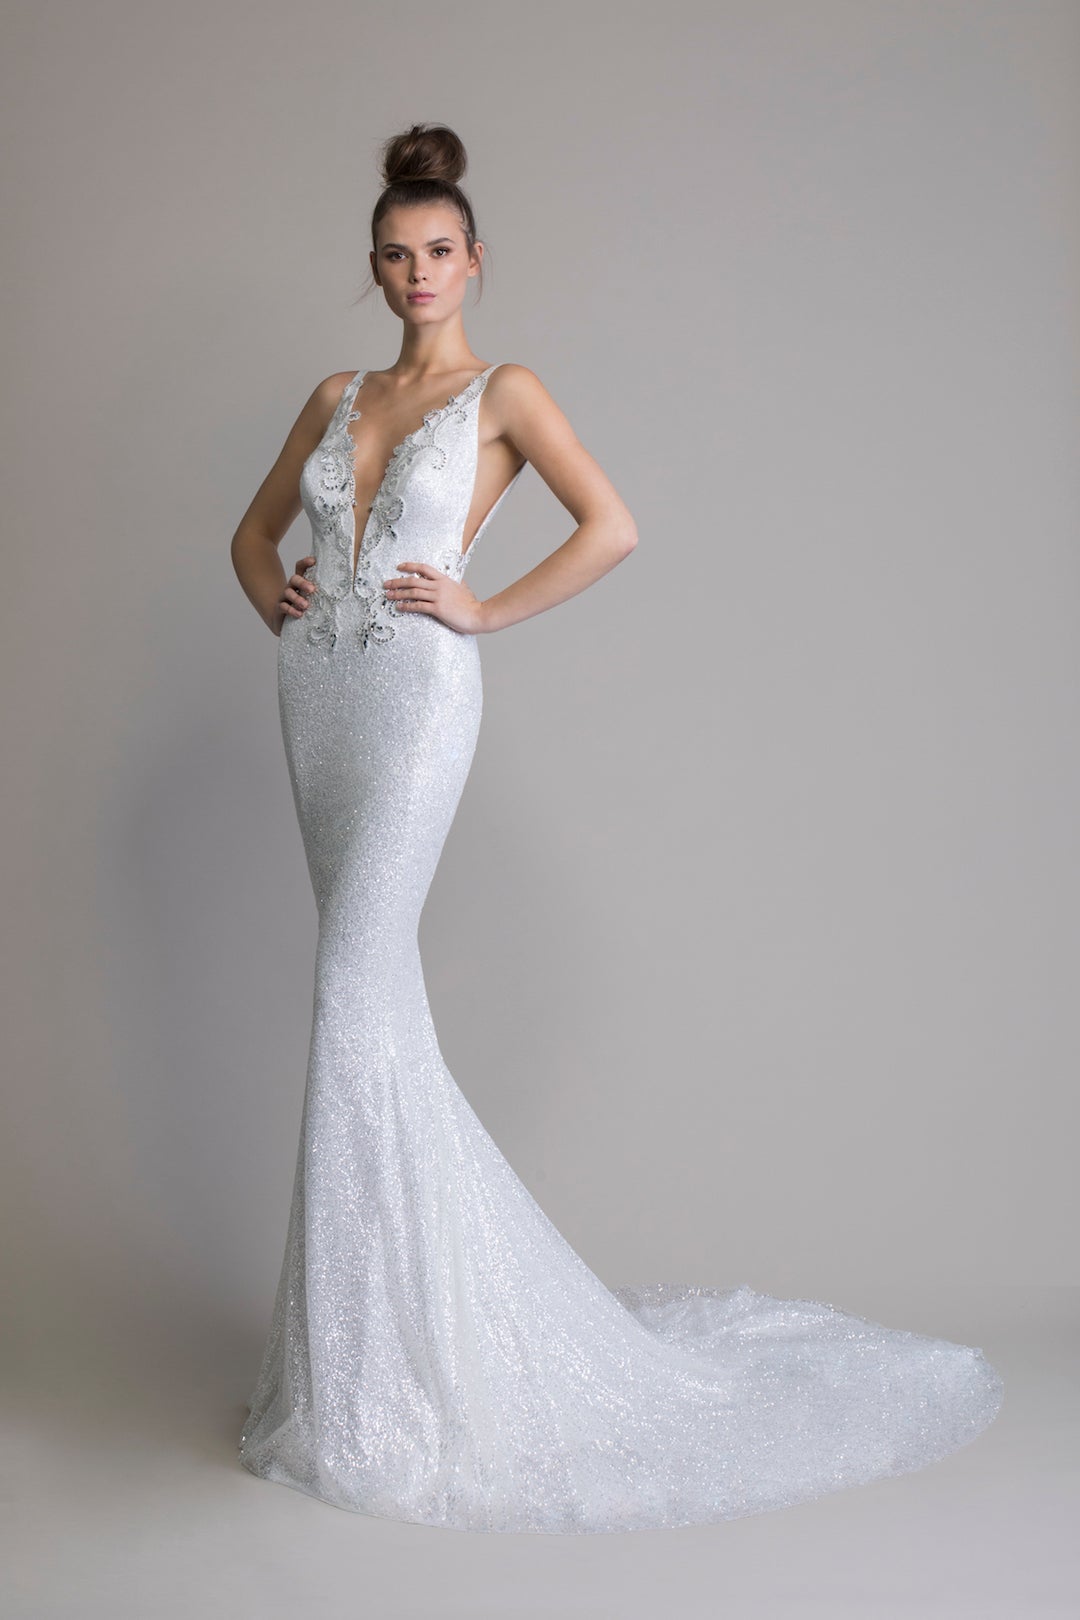 Pnina Tornai's new LOVE 2020 Collection is out! This is style 14774